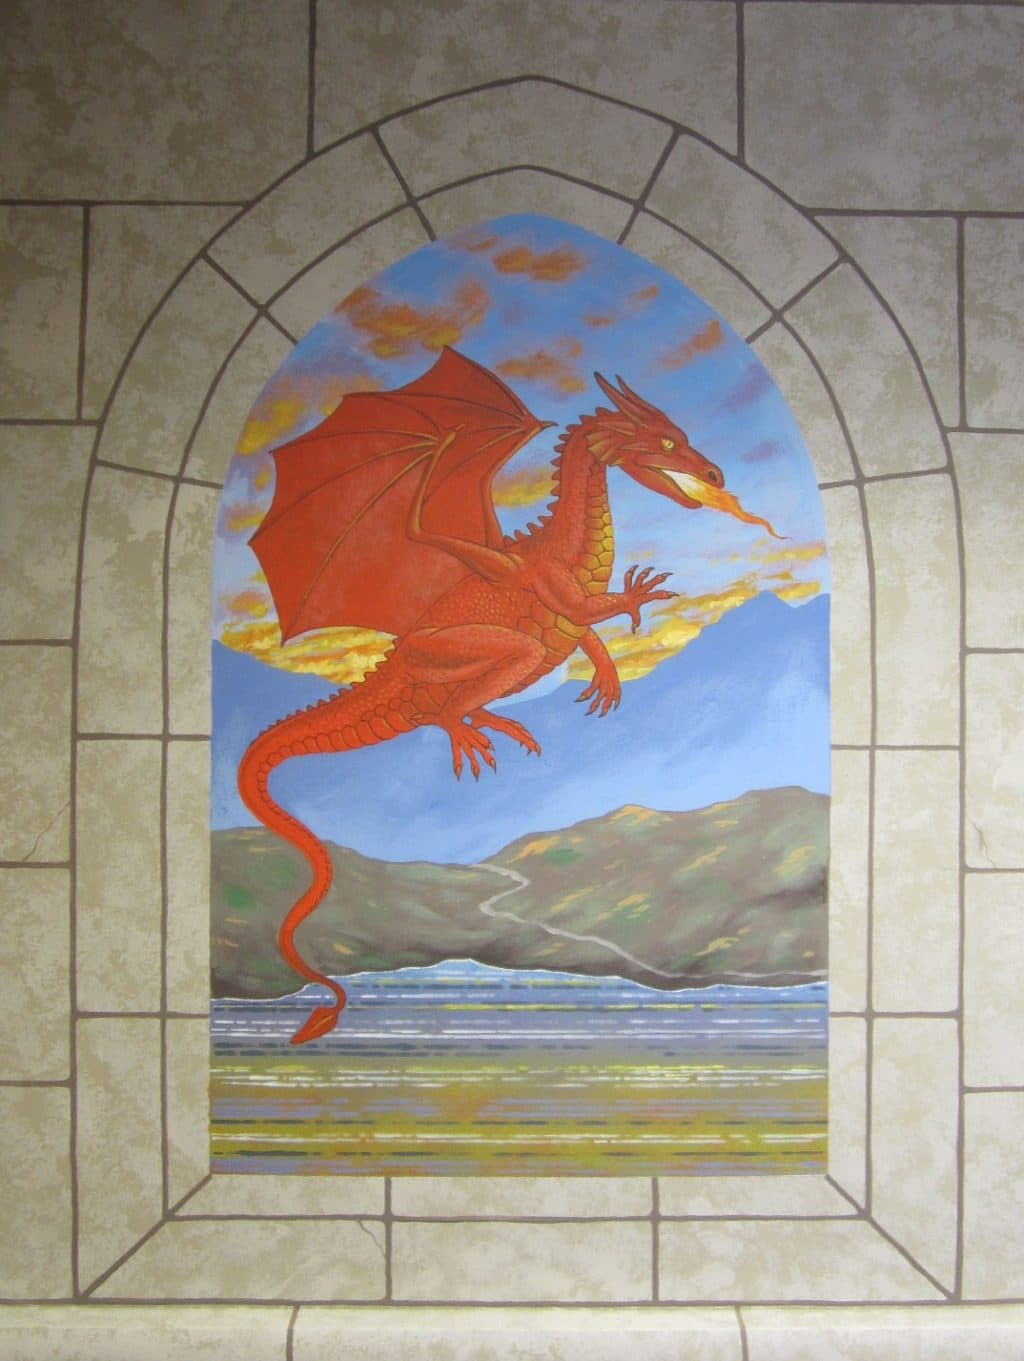 commissions-mural-gallery-castle (6)